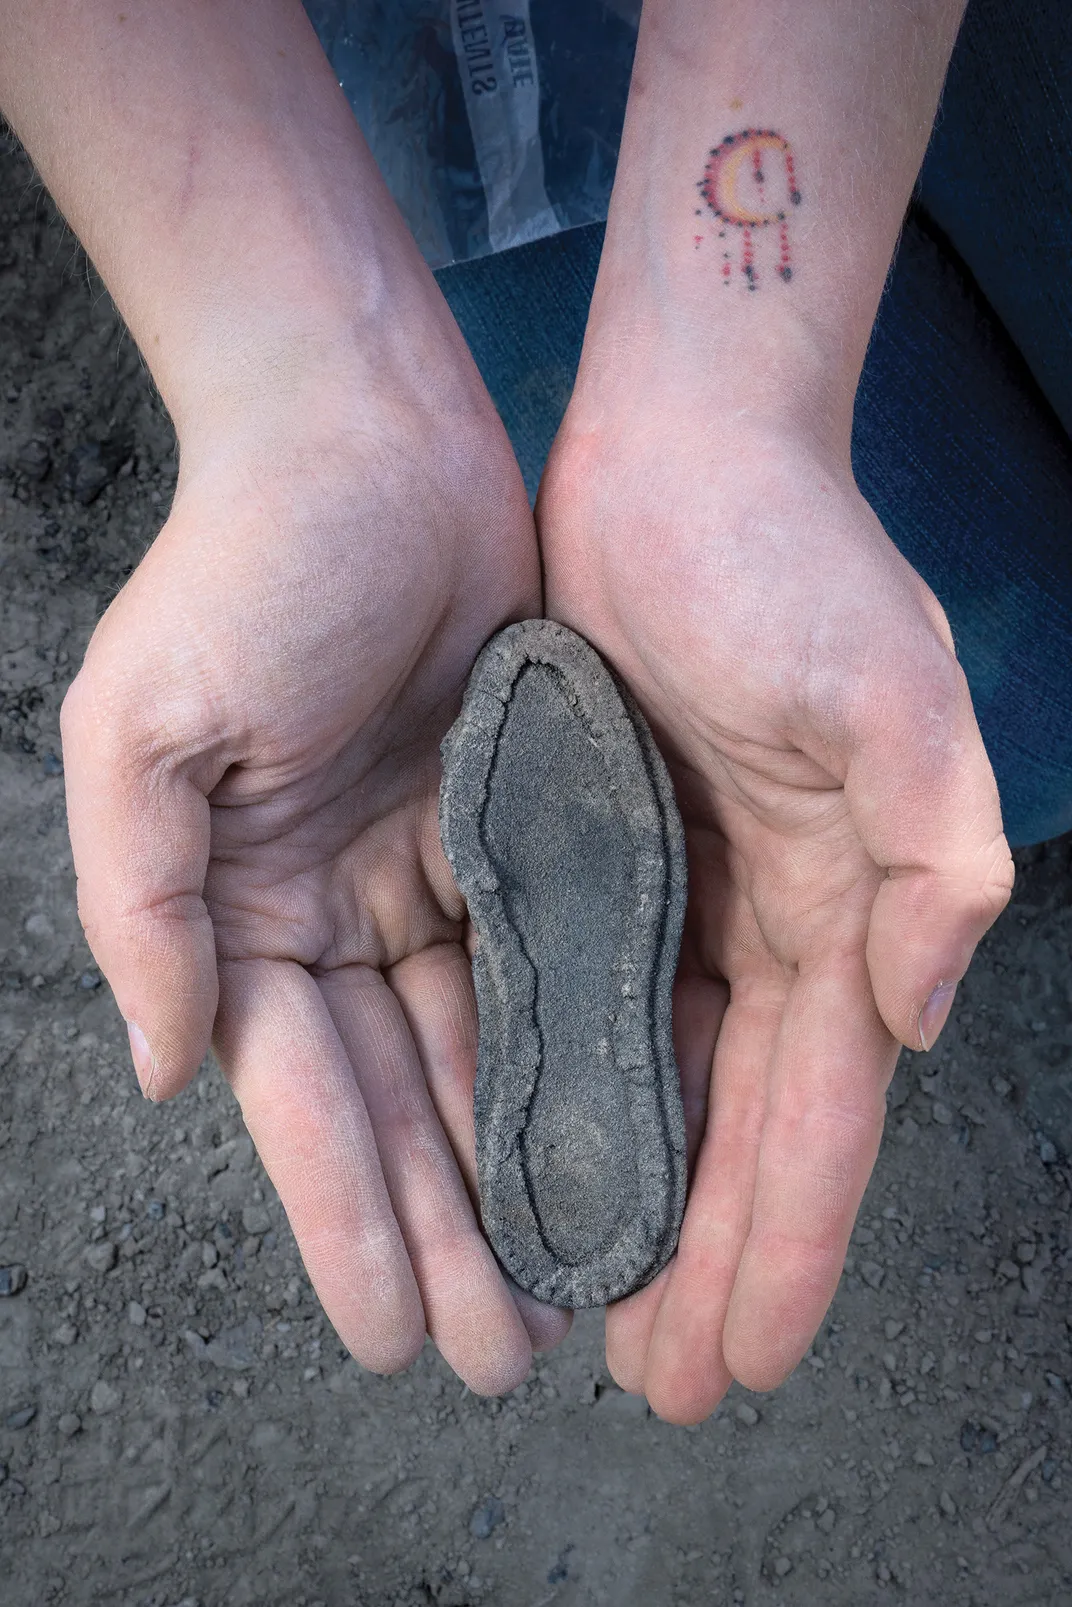 The leather sole of a child’s shoe